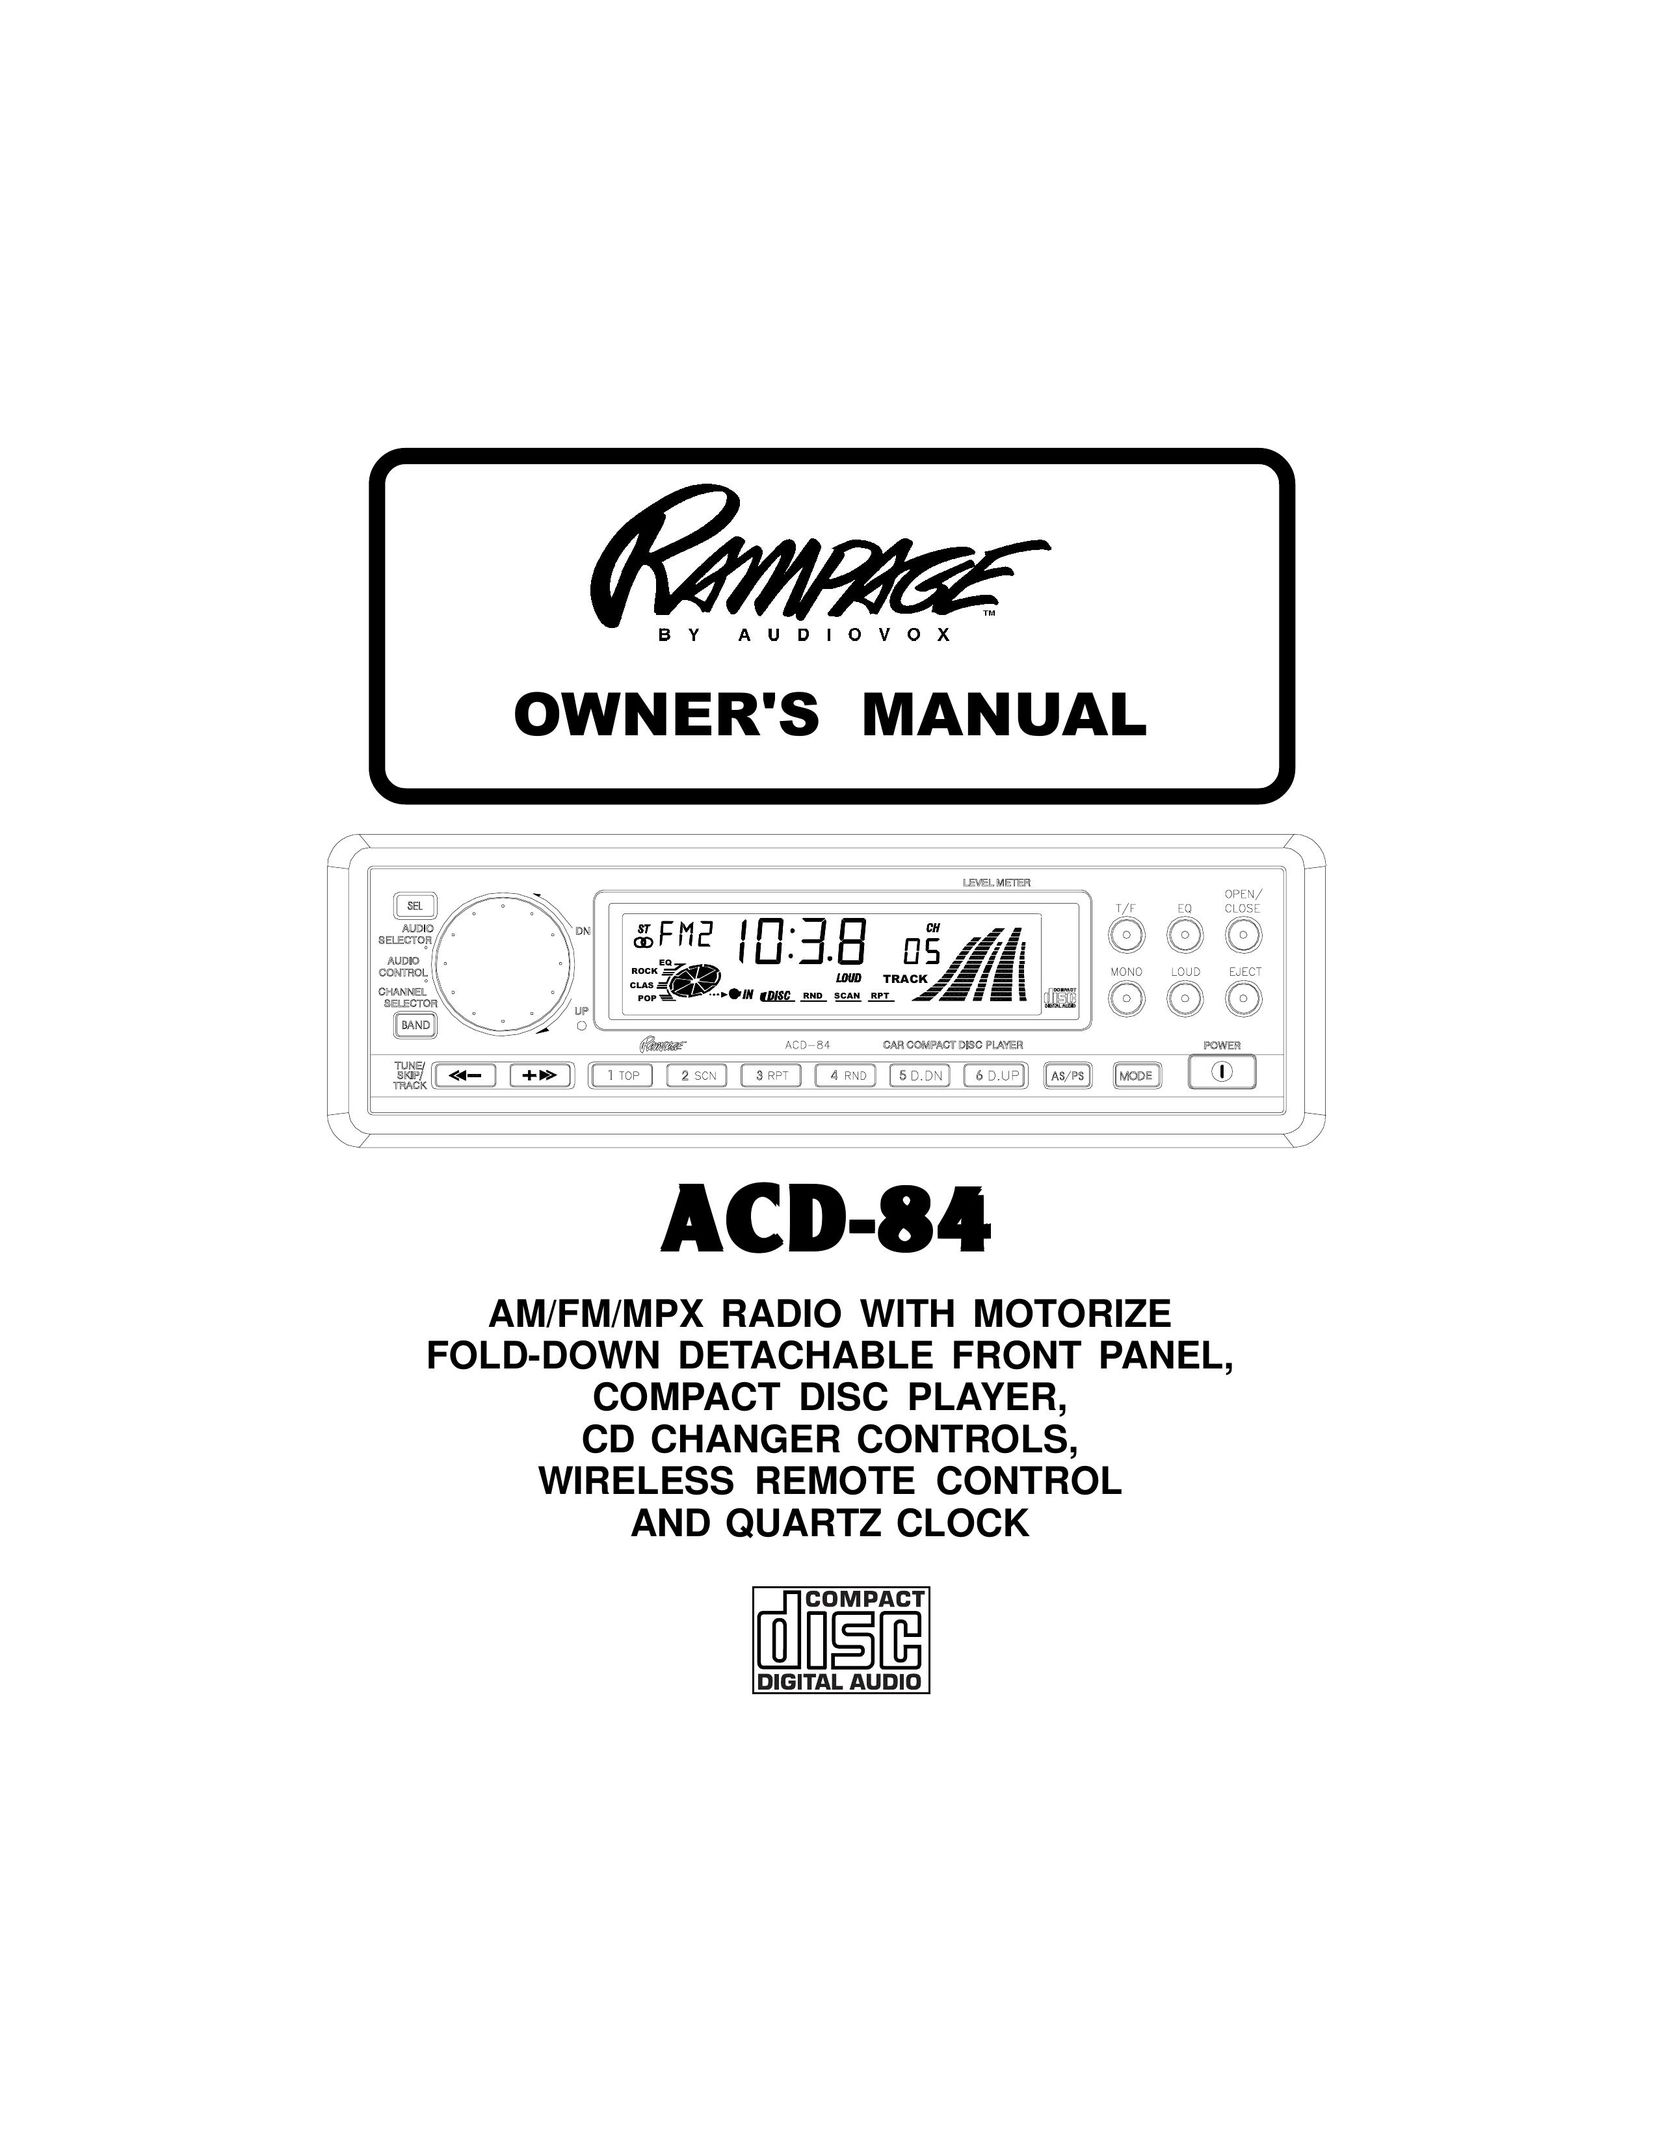 Audiovox ACD-84 Car Stereo System User Manual